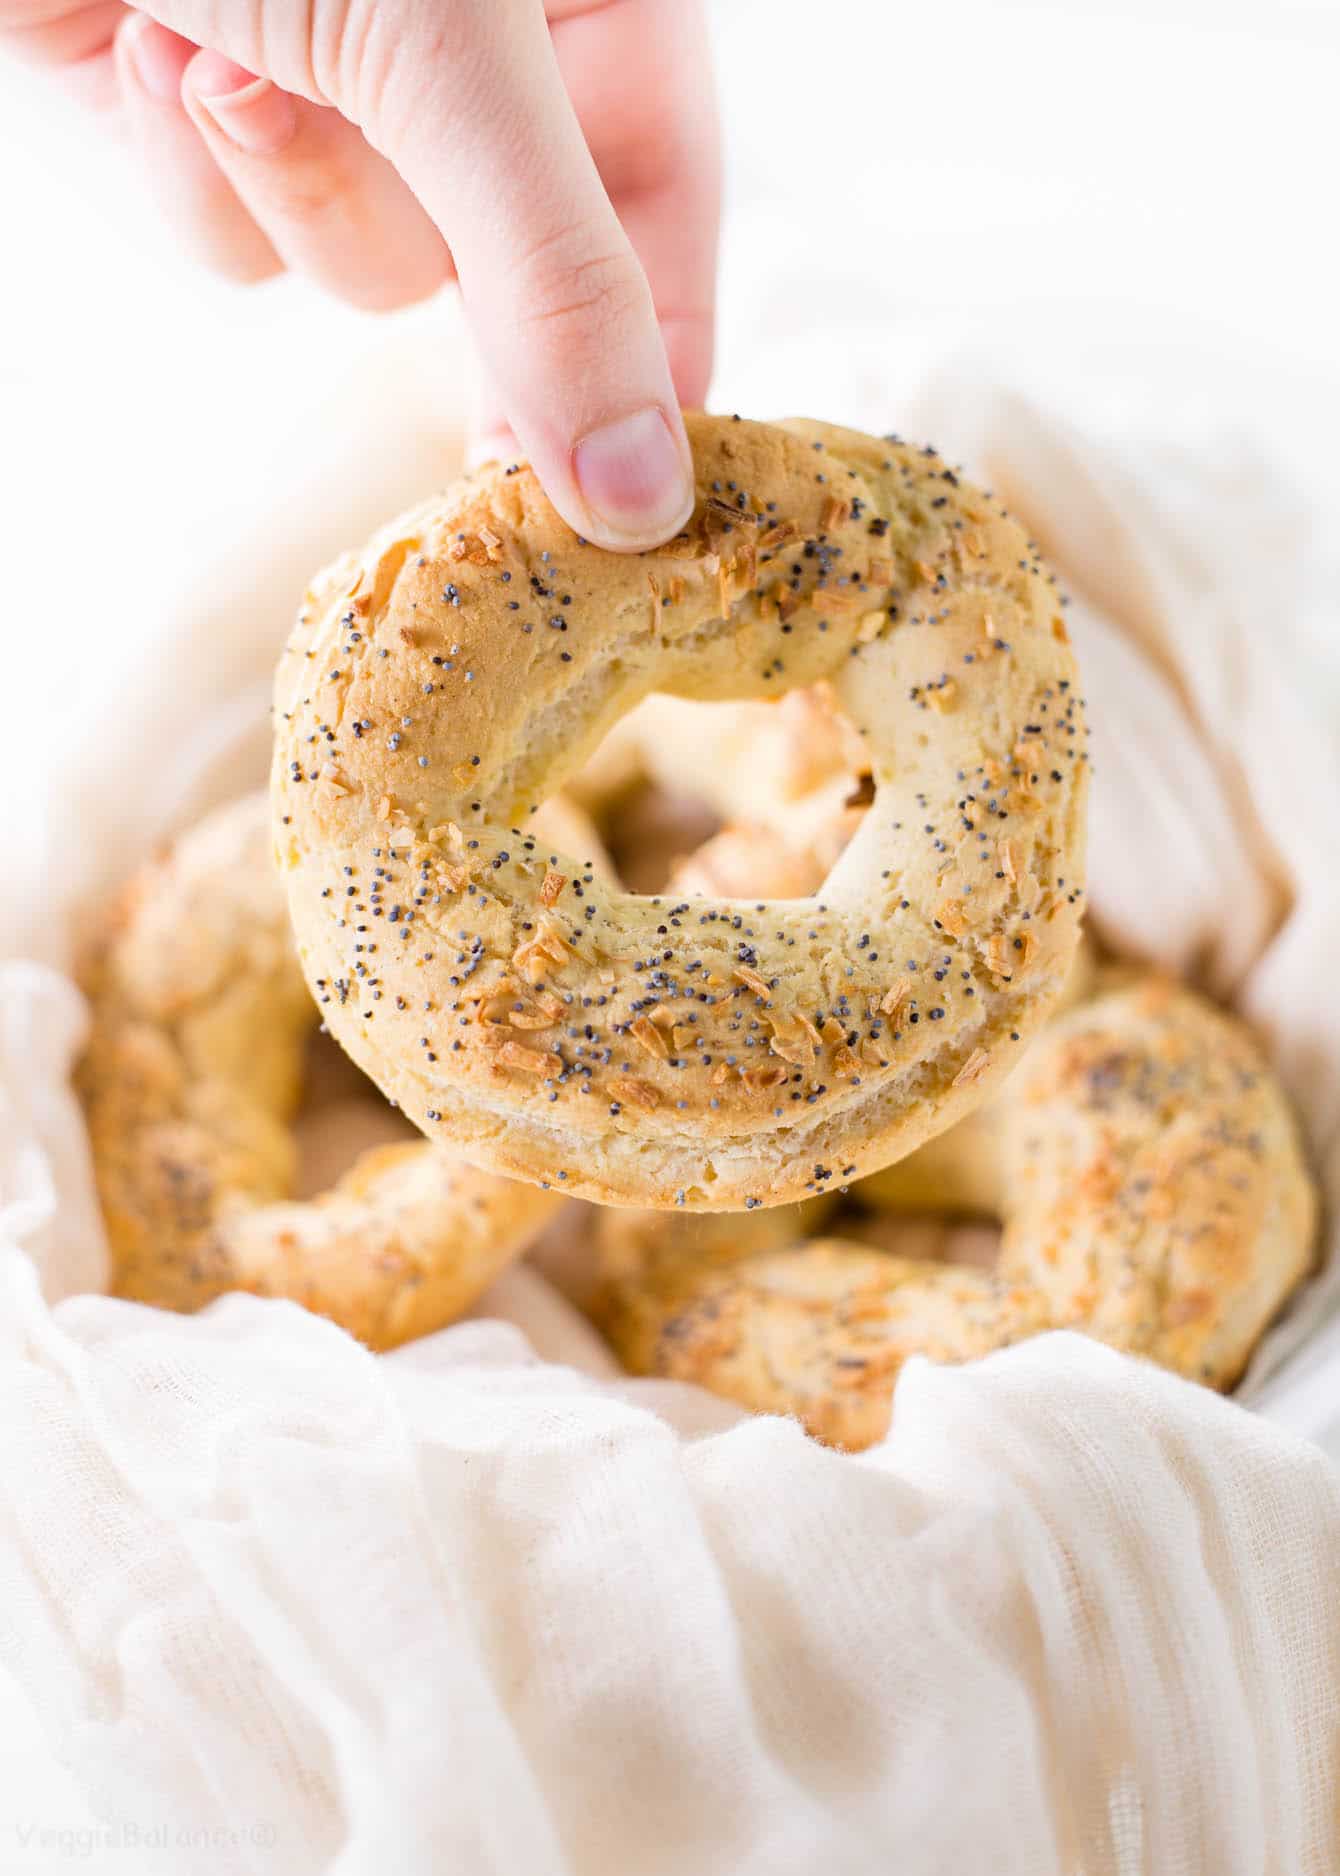 How do you make bagels guide